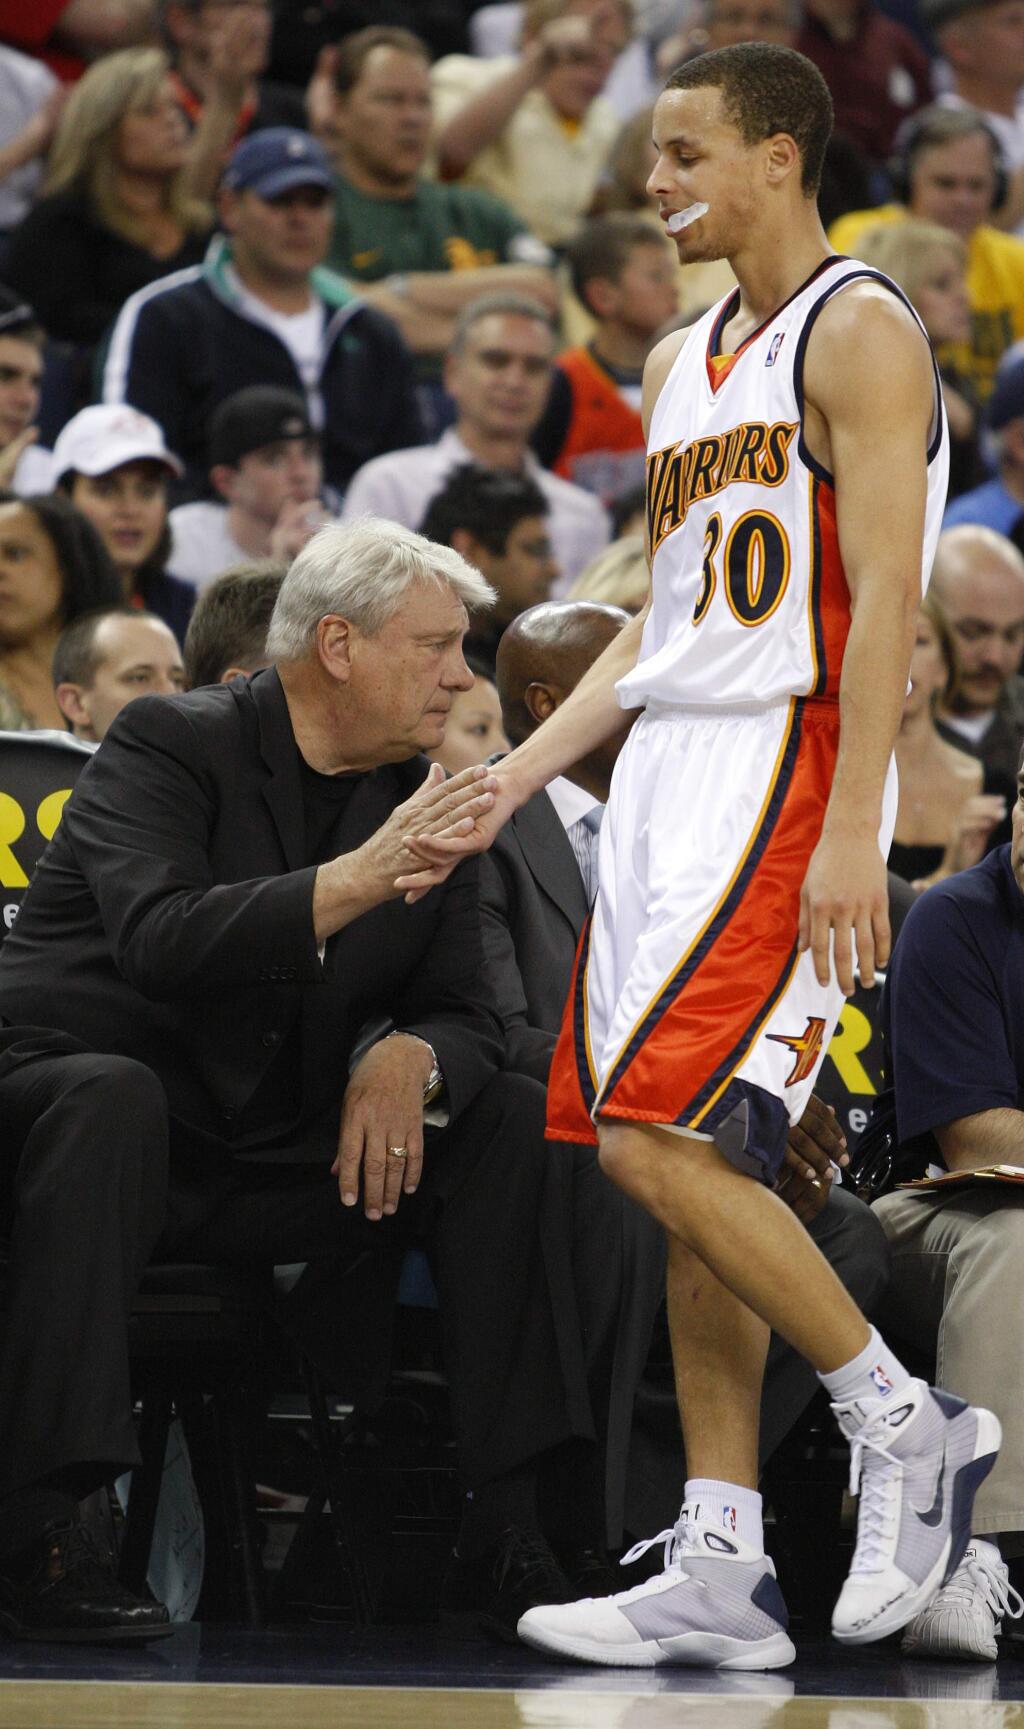 Then-Golden State Warriors coach Don Nelson, left, shakes the hand of Warriors guard Stephen Curry during the first half against the Utah Jazz on Tuesday, April 13, 2010, in Oakland. (AP Photo/Ben Margot)